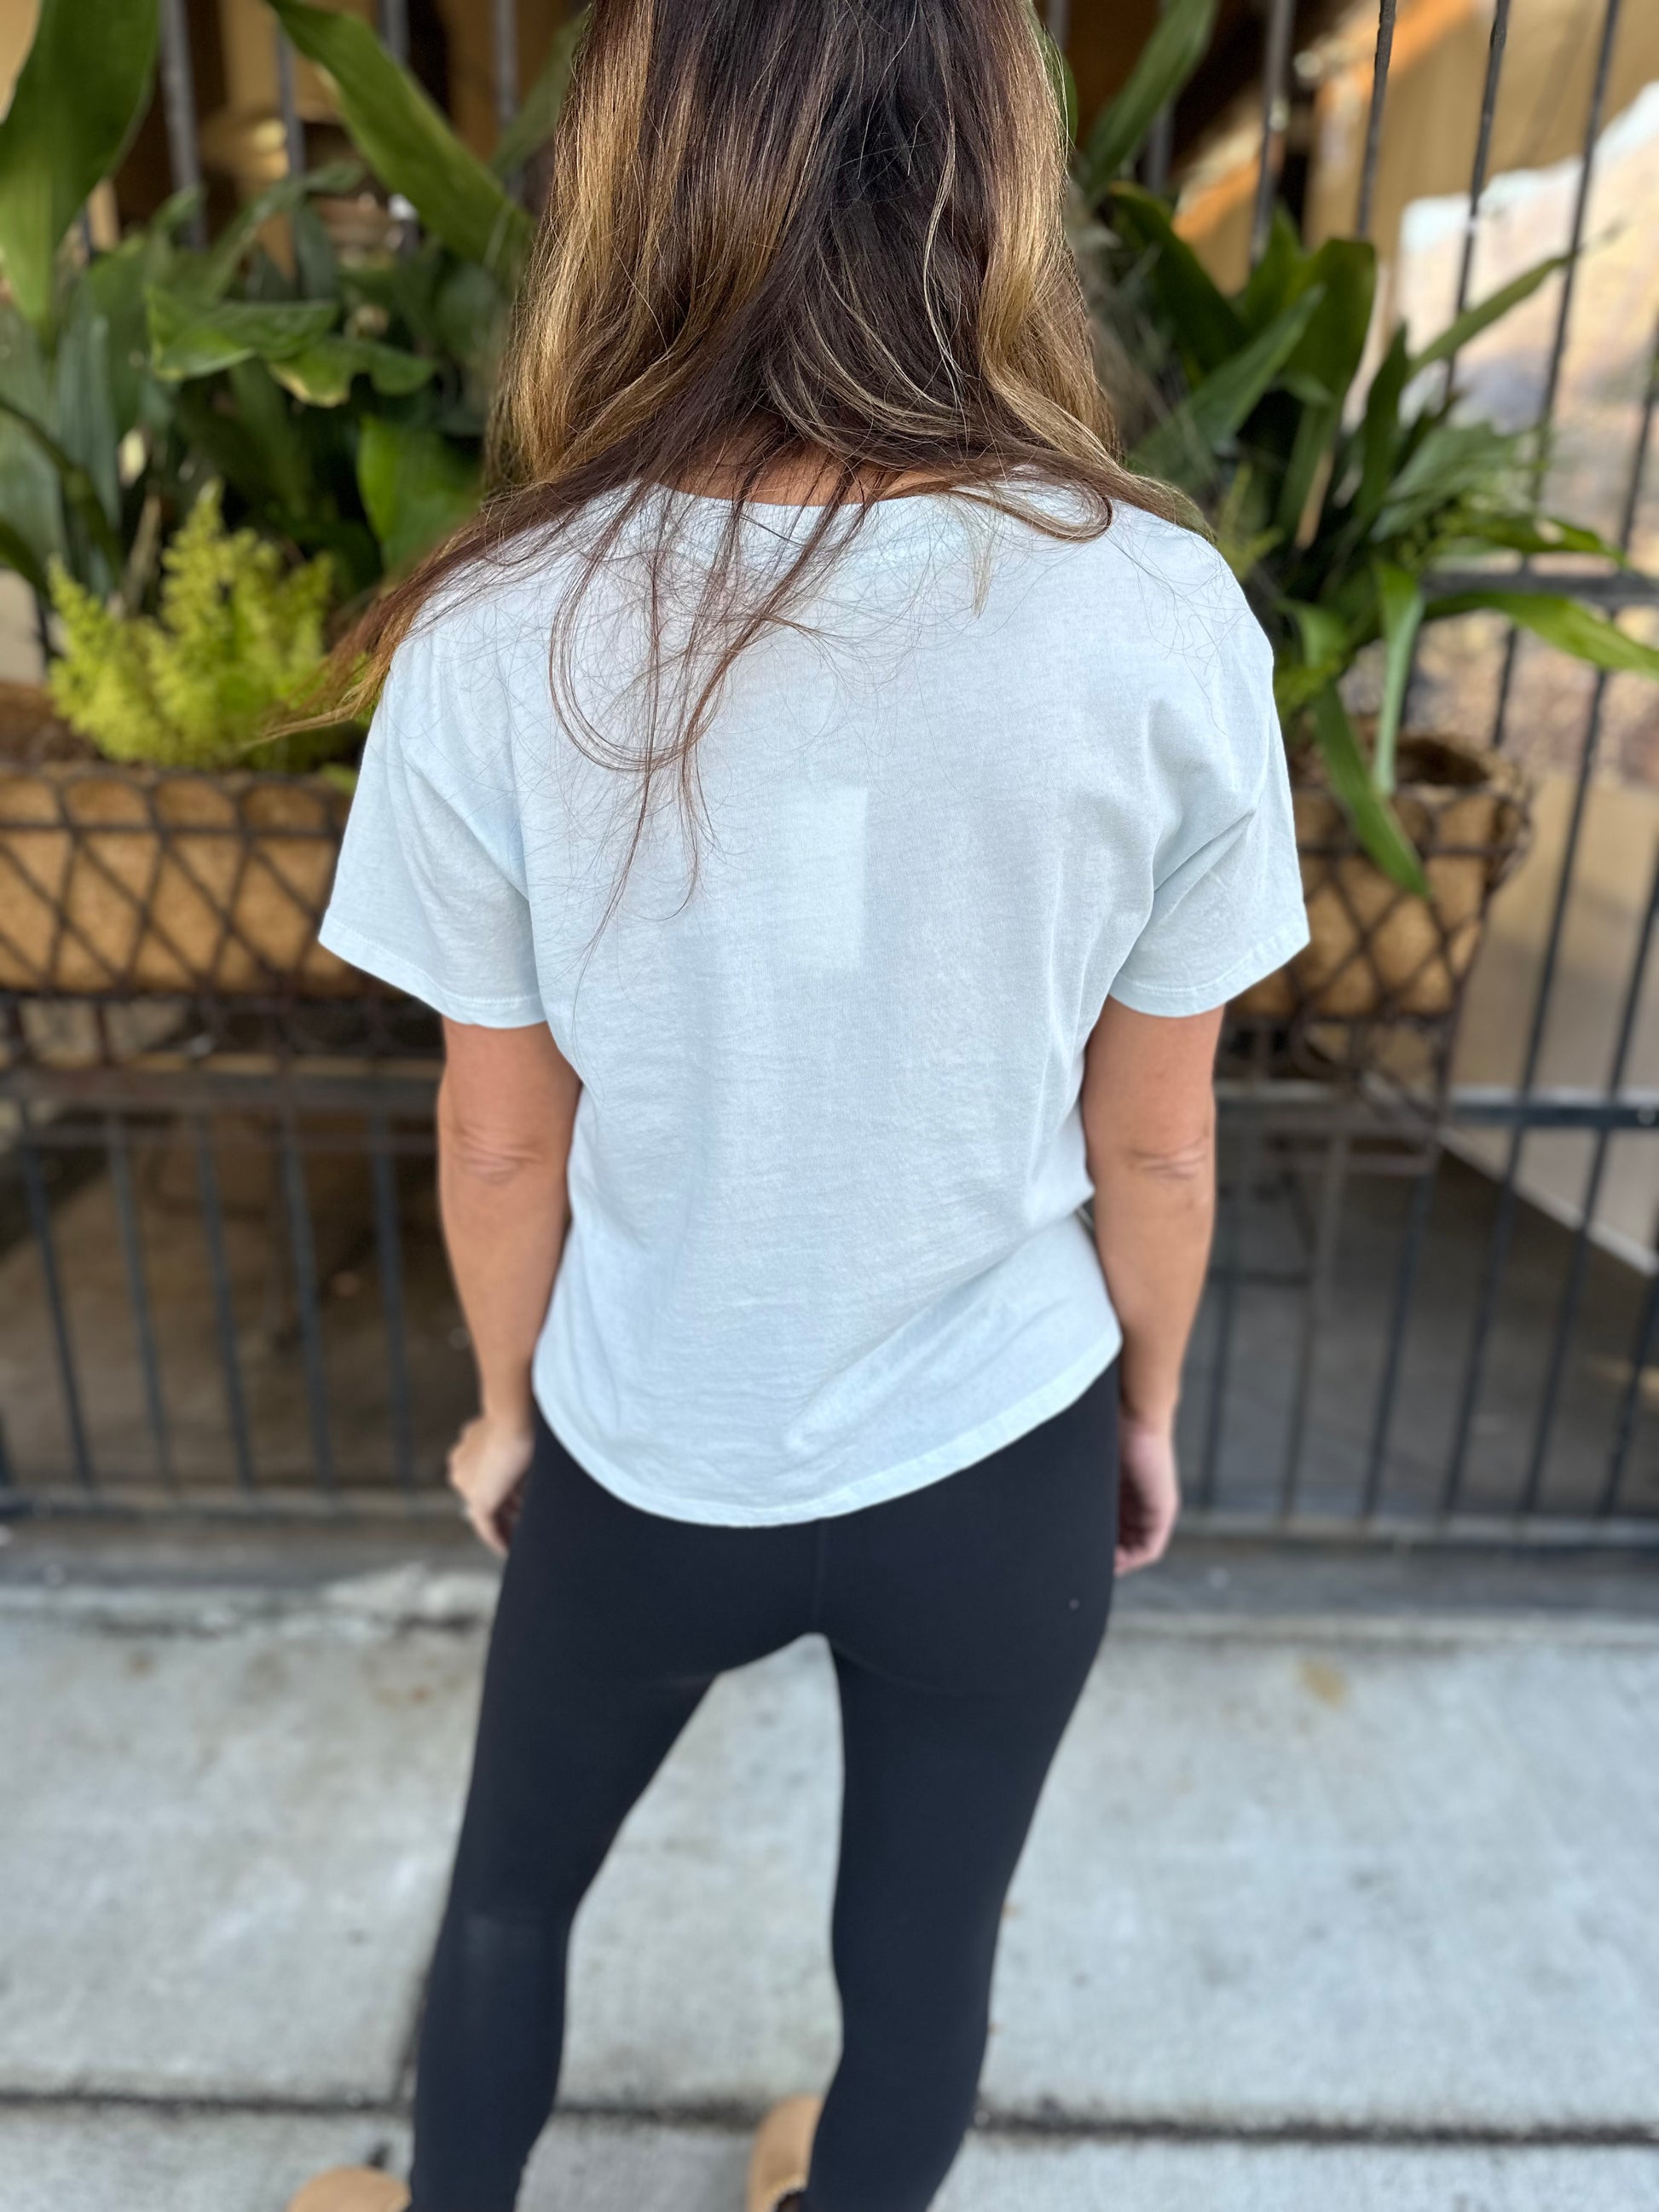 Get Up and Go Yoga Pants  Ava Lane Boutique - Women's clothing